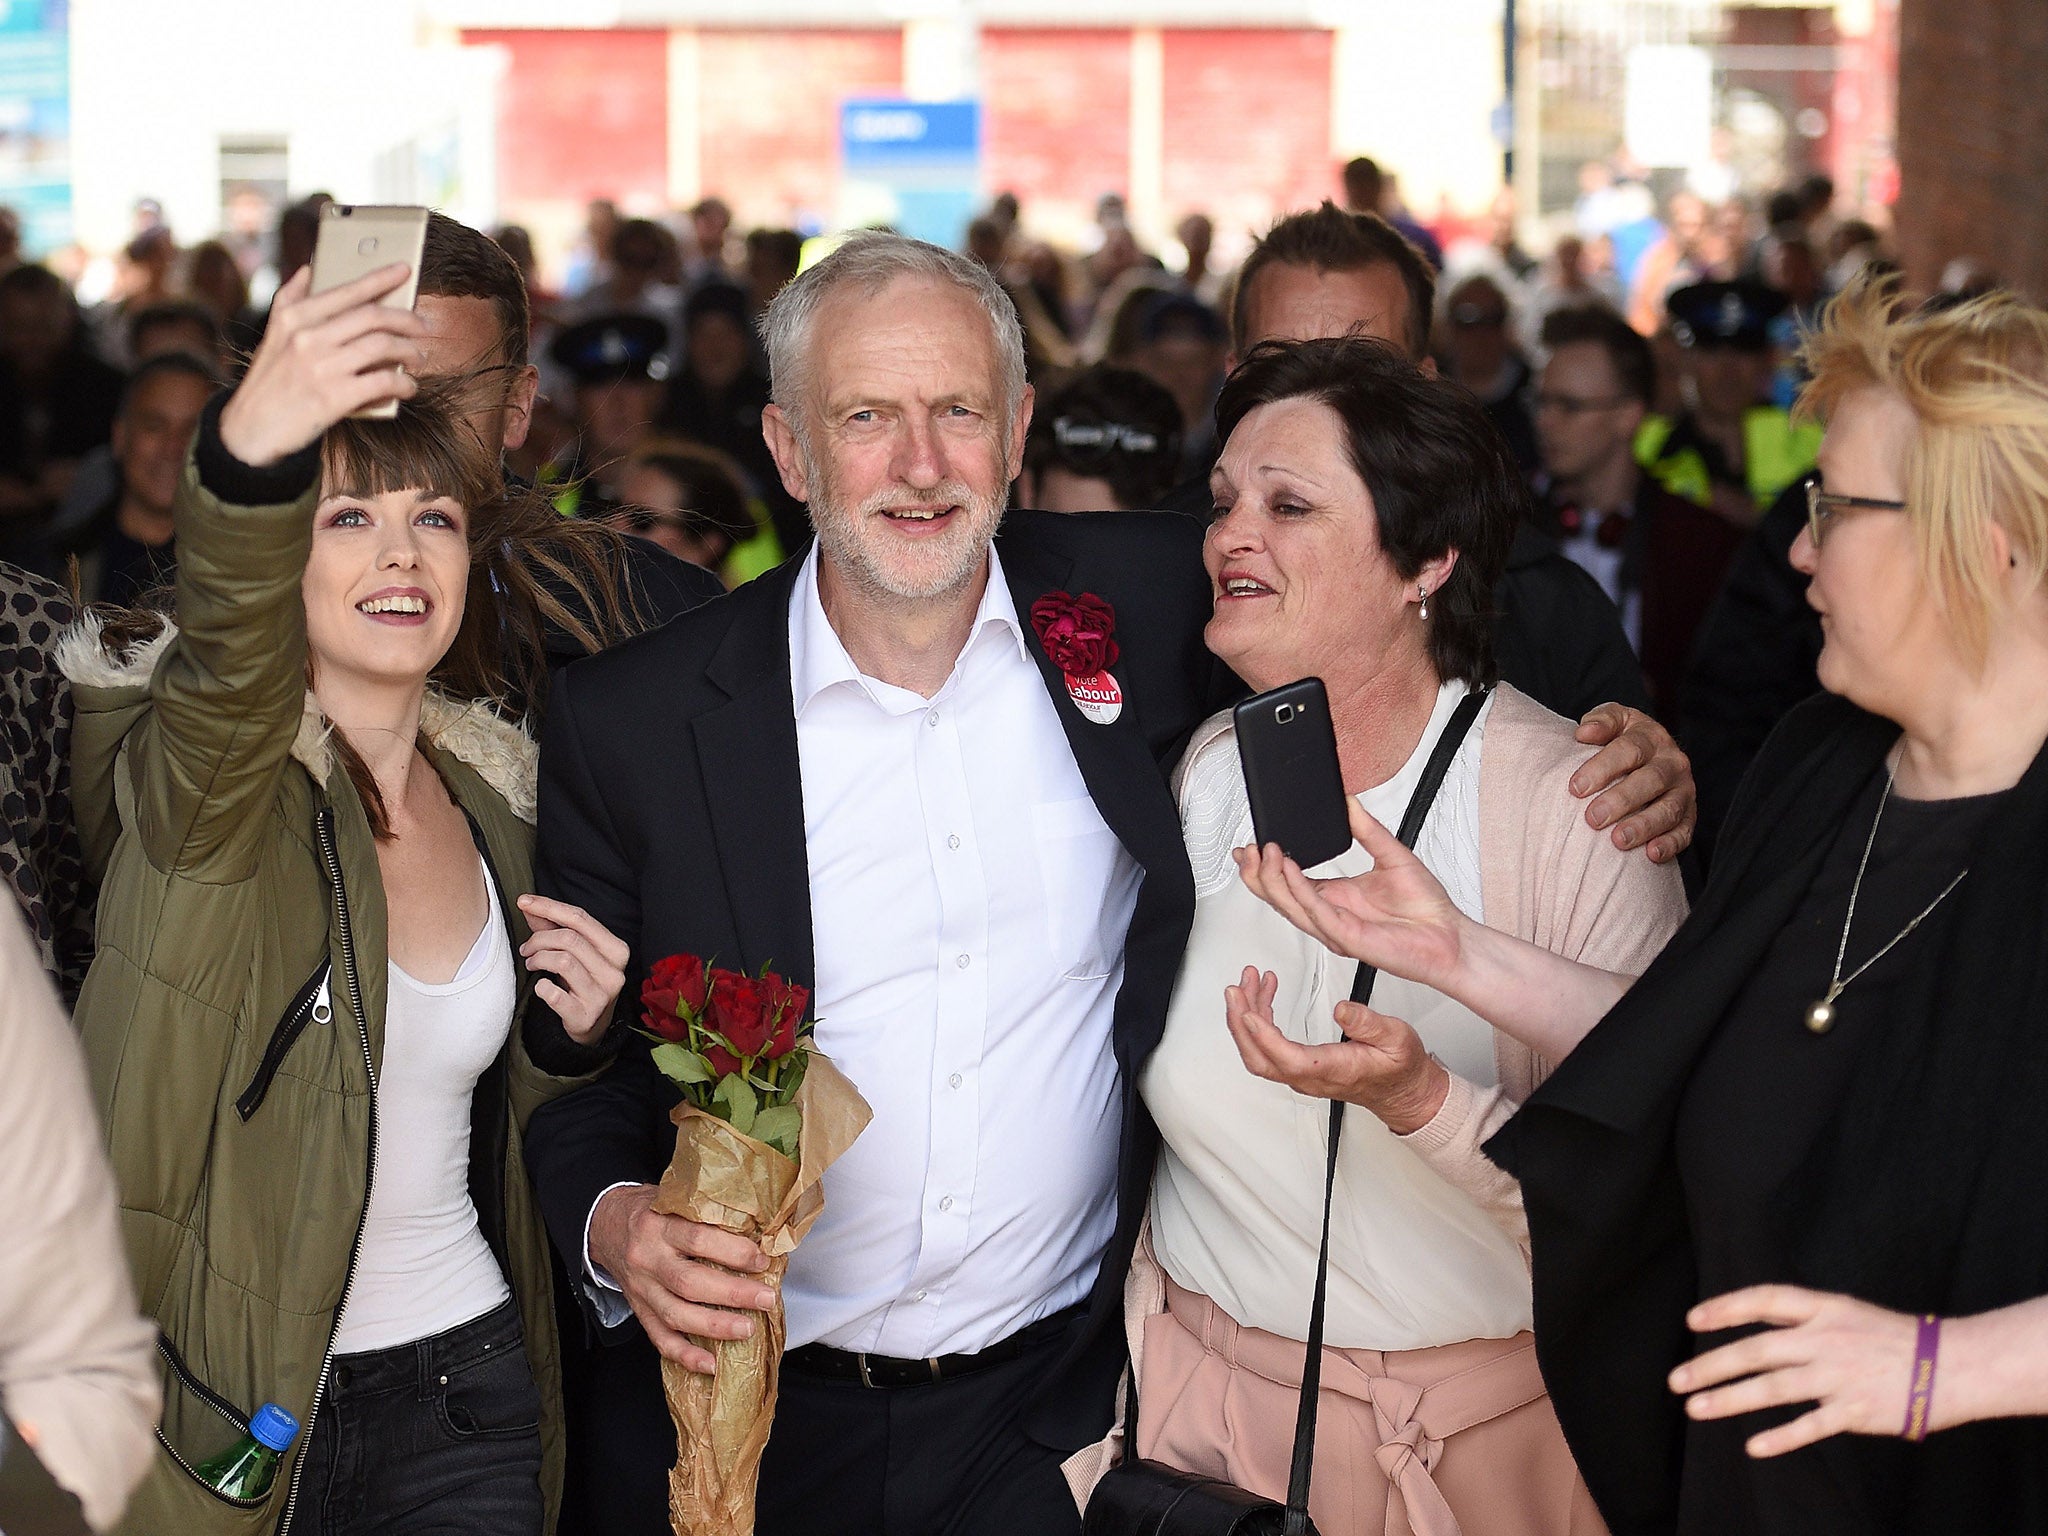 Jeremy Corbyn has galvanised the young vote, but will that trend continue?